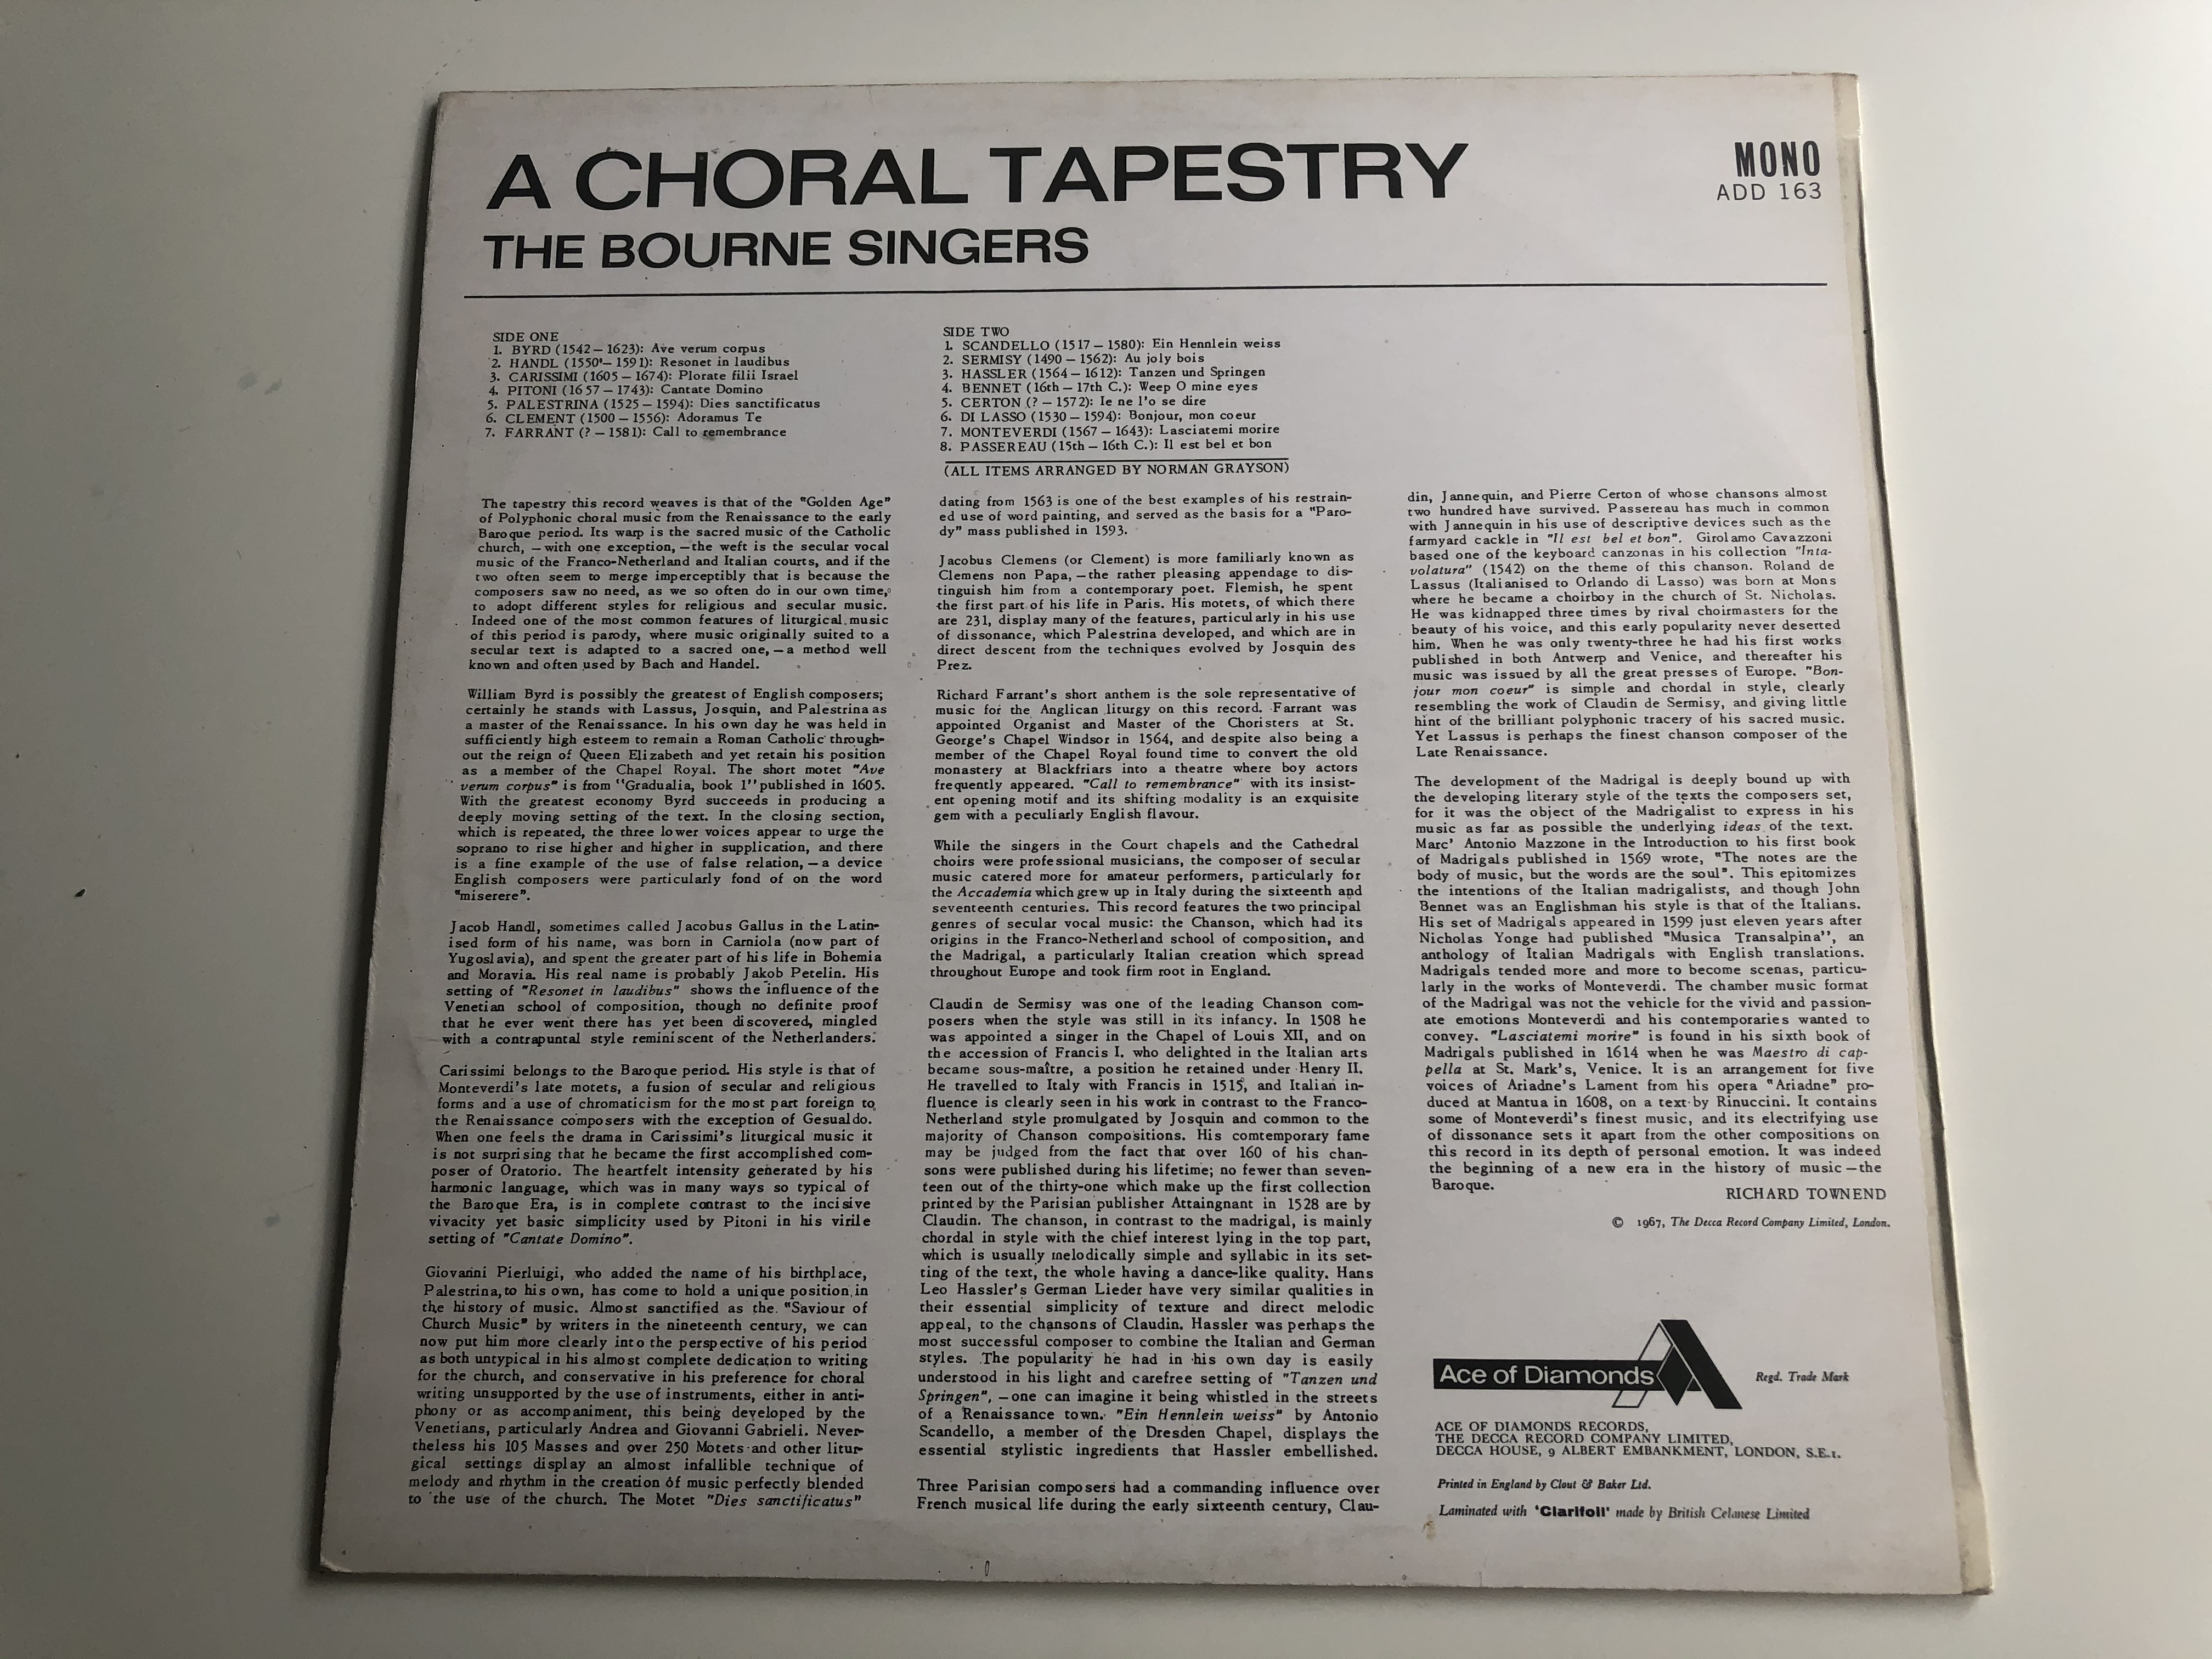 a-choral-tapestry-the-bourne-singers-ace-of-diamonds-lp-1967-mono-add-163-2-.jpg